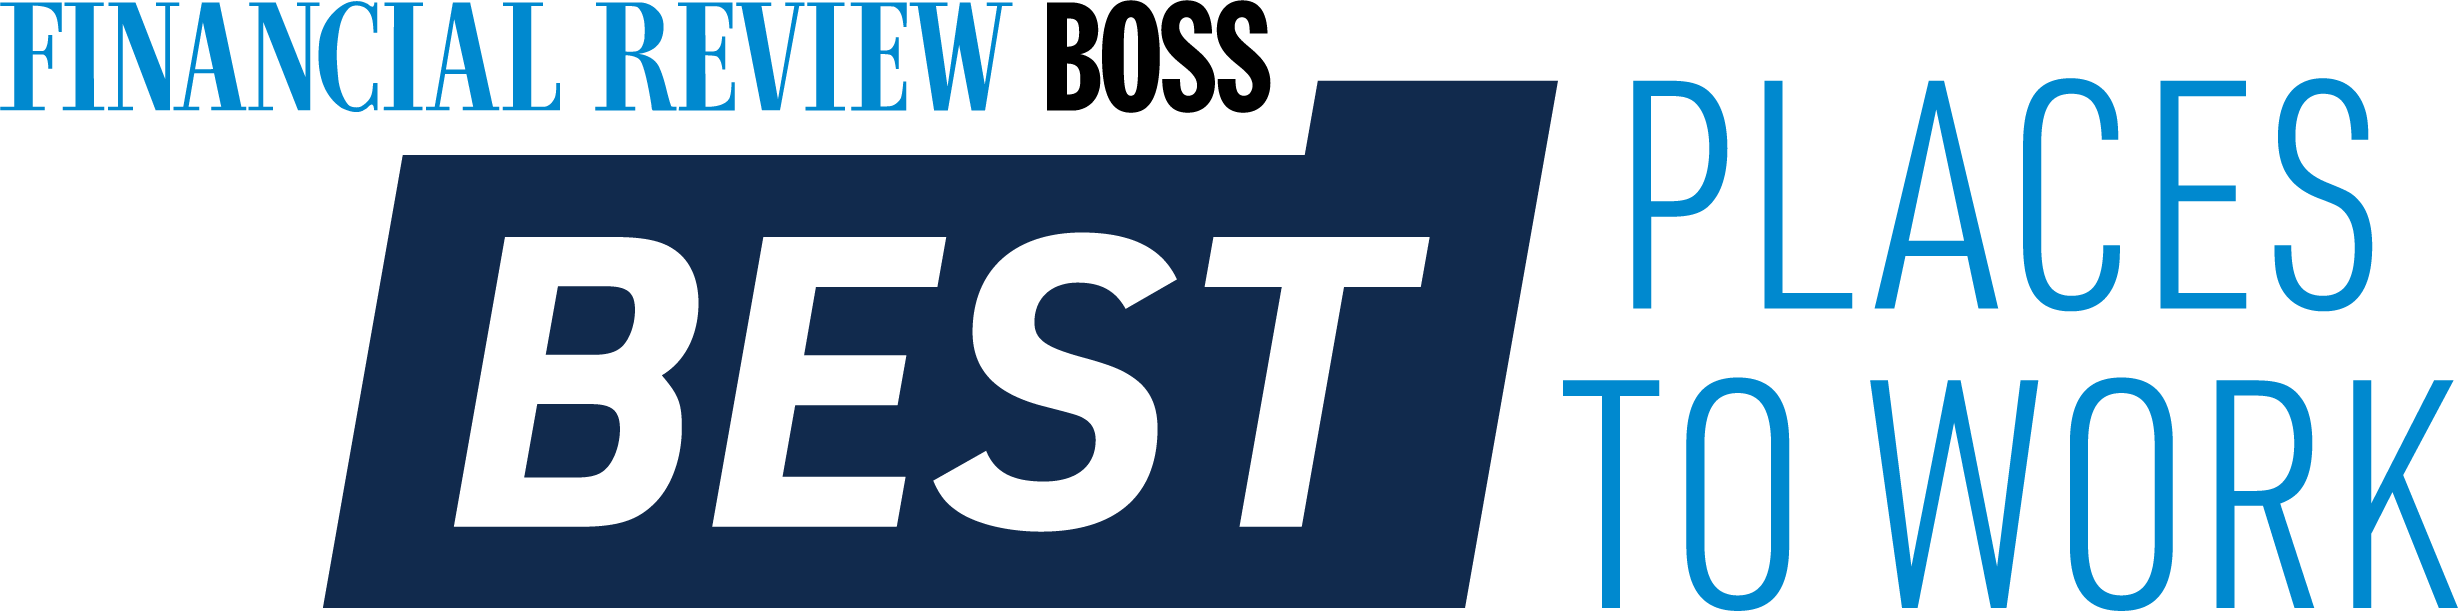 Best Place To Work Logo